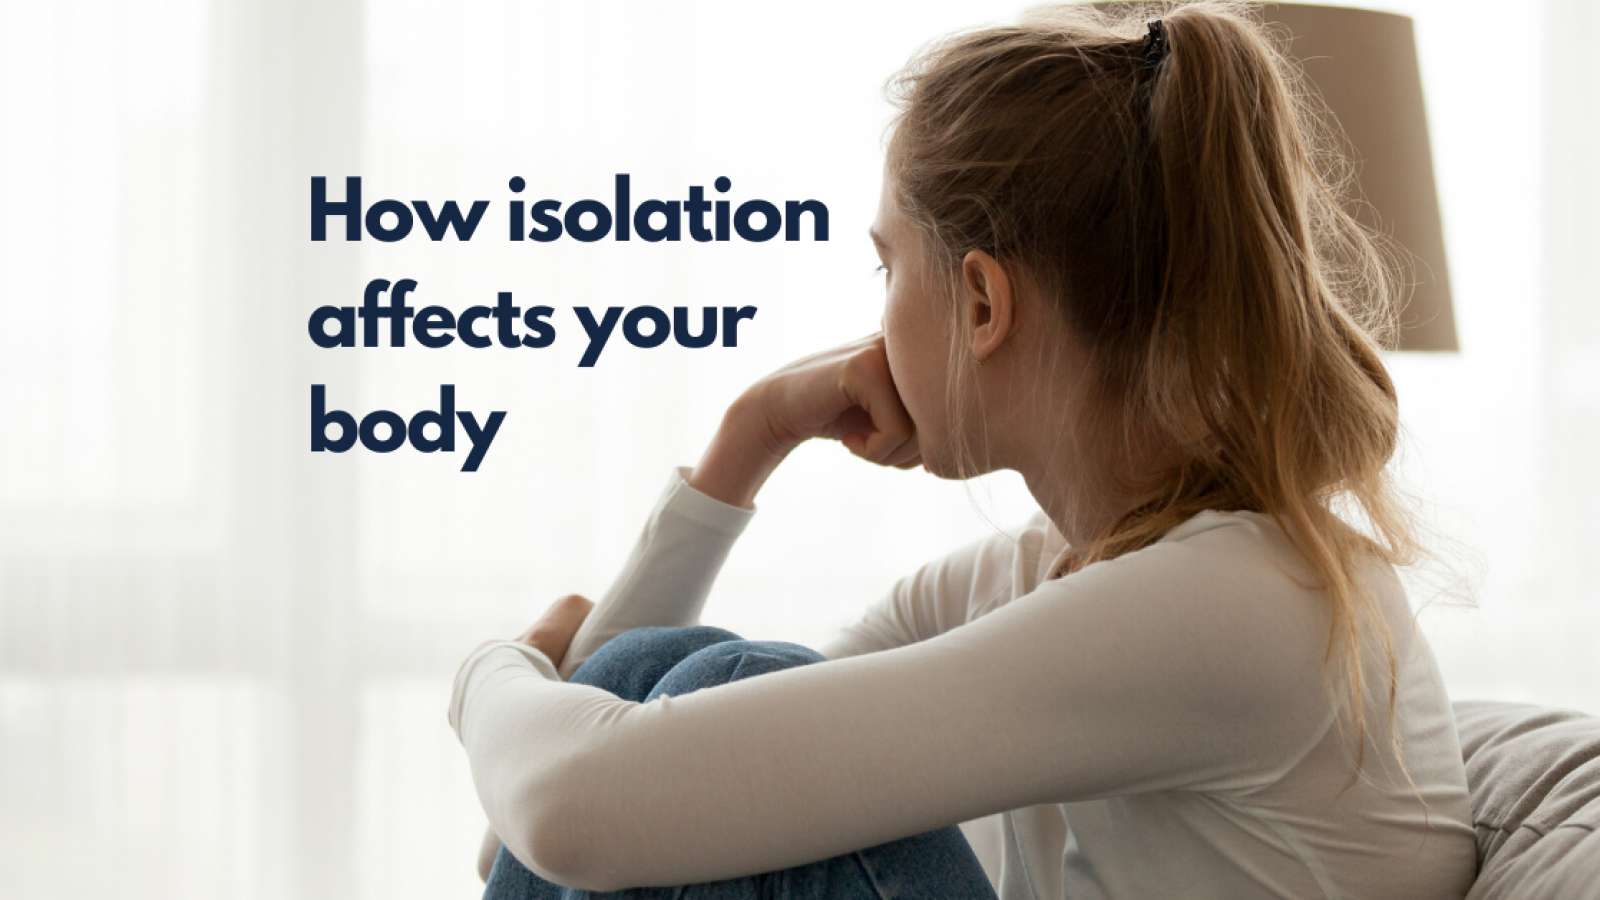 How social isolation affects your body